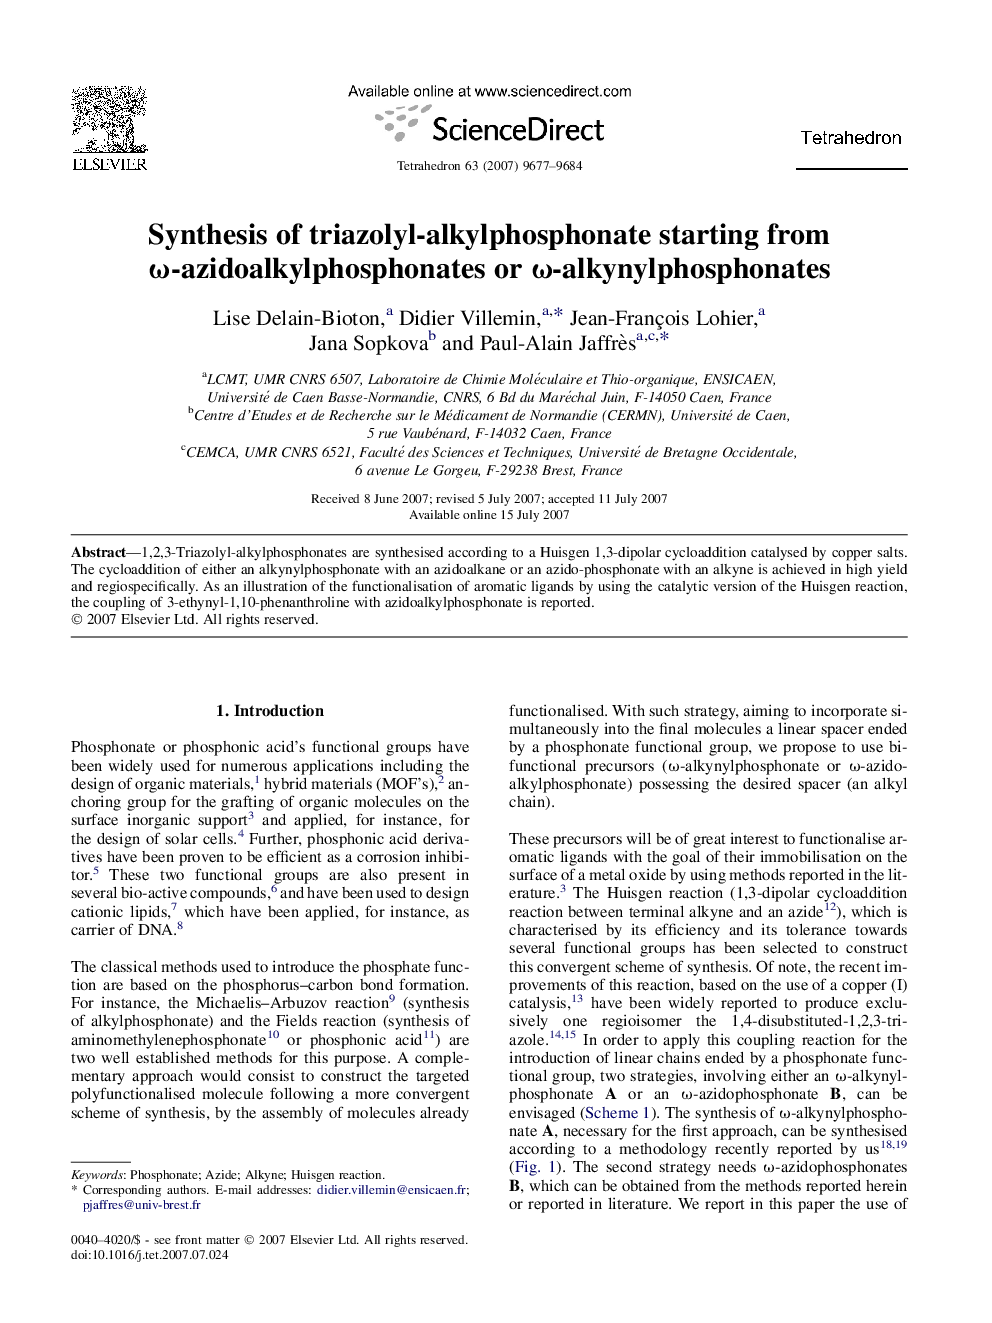 Synthesis of triazolyl-alkylphosphonate starting from Ï-azidoalkylphosphonates or Ï-alkynylphosphonates